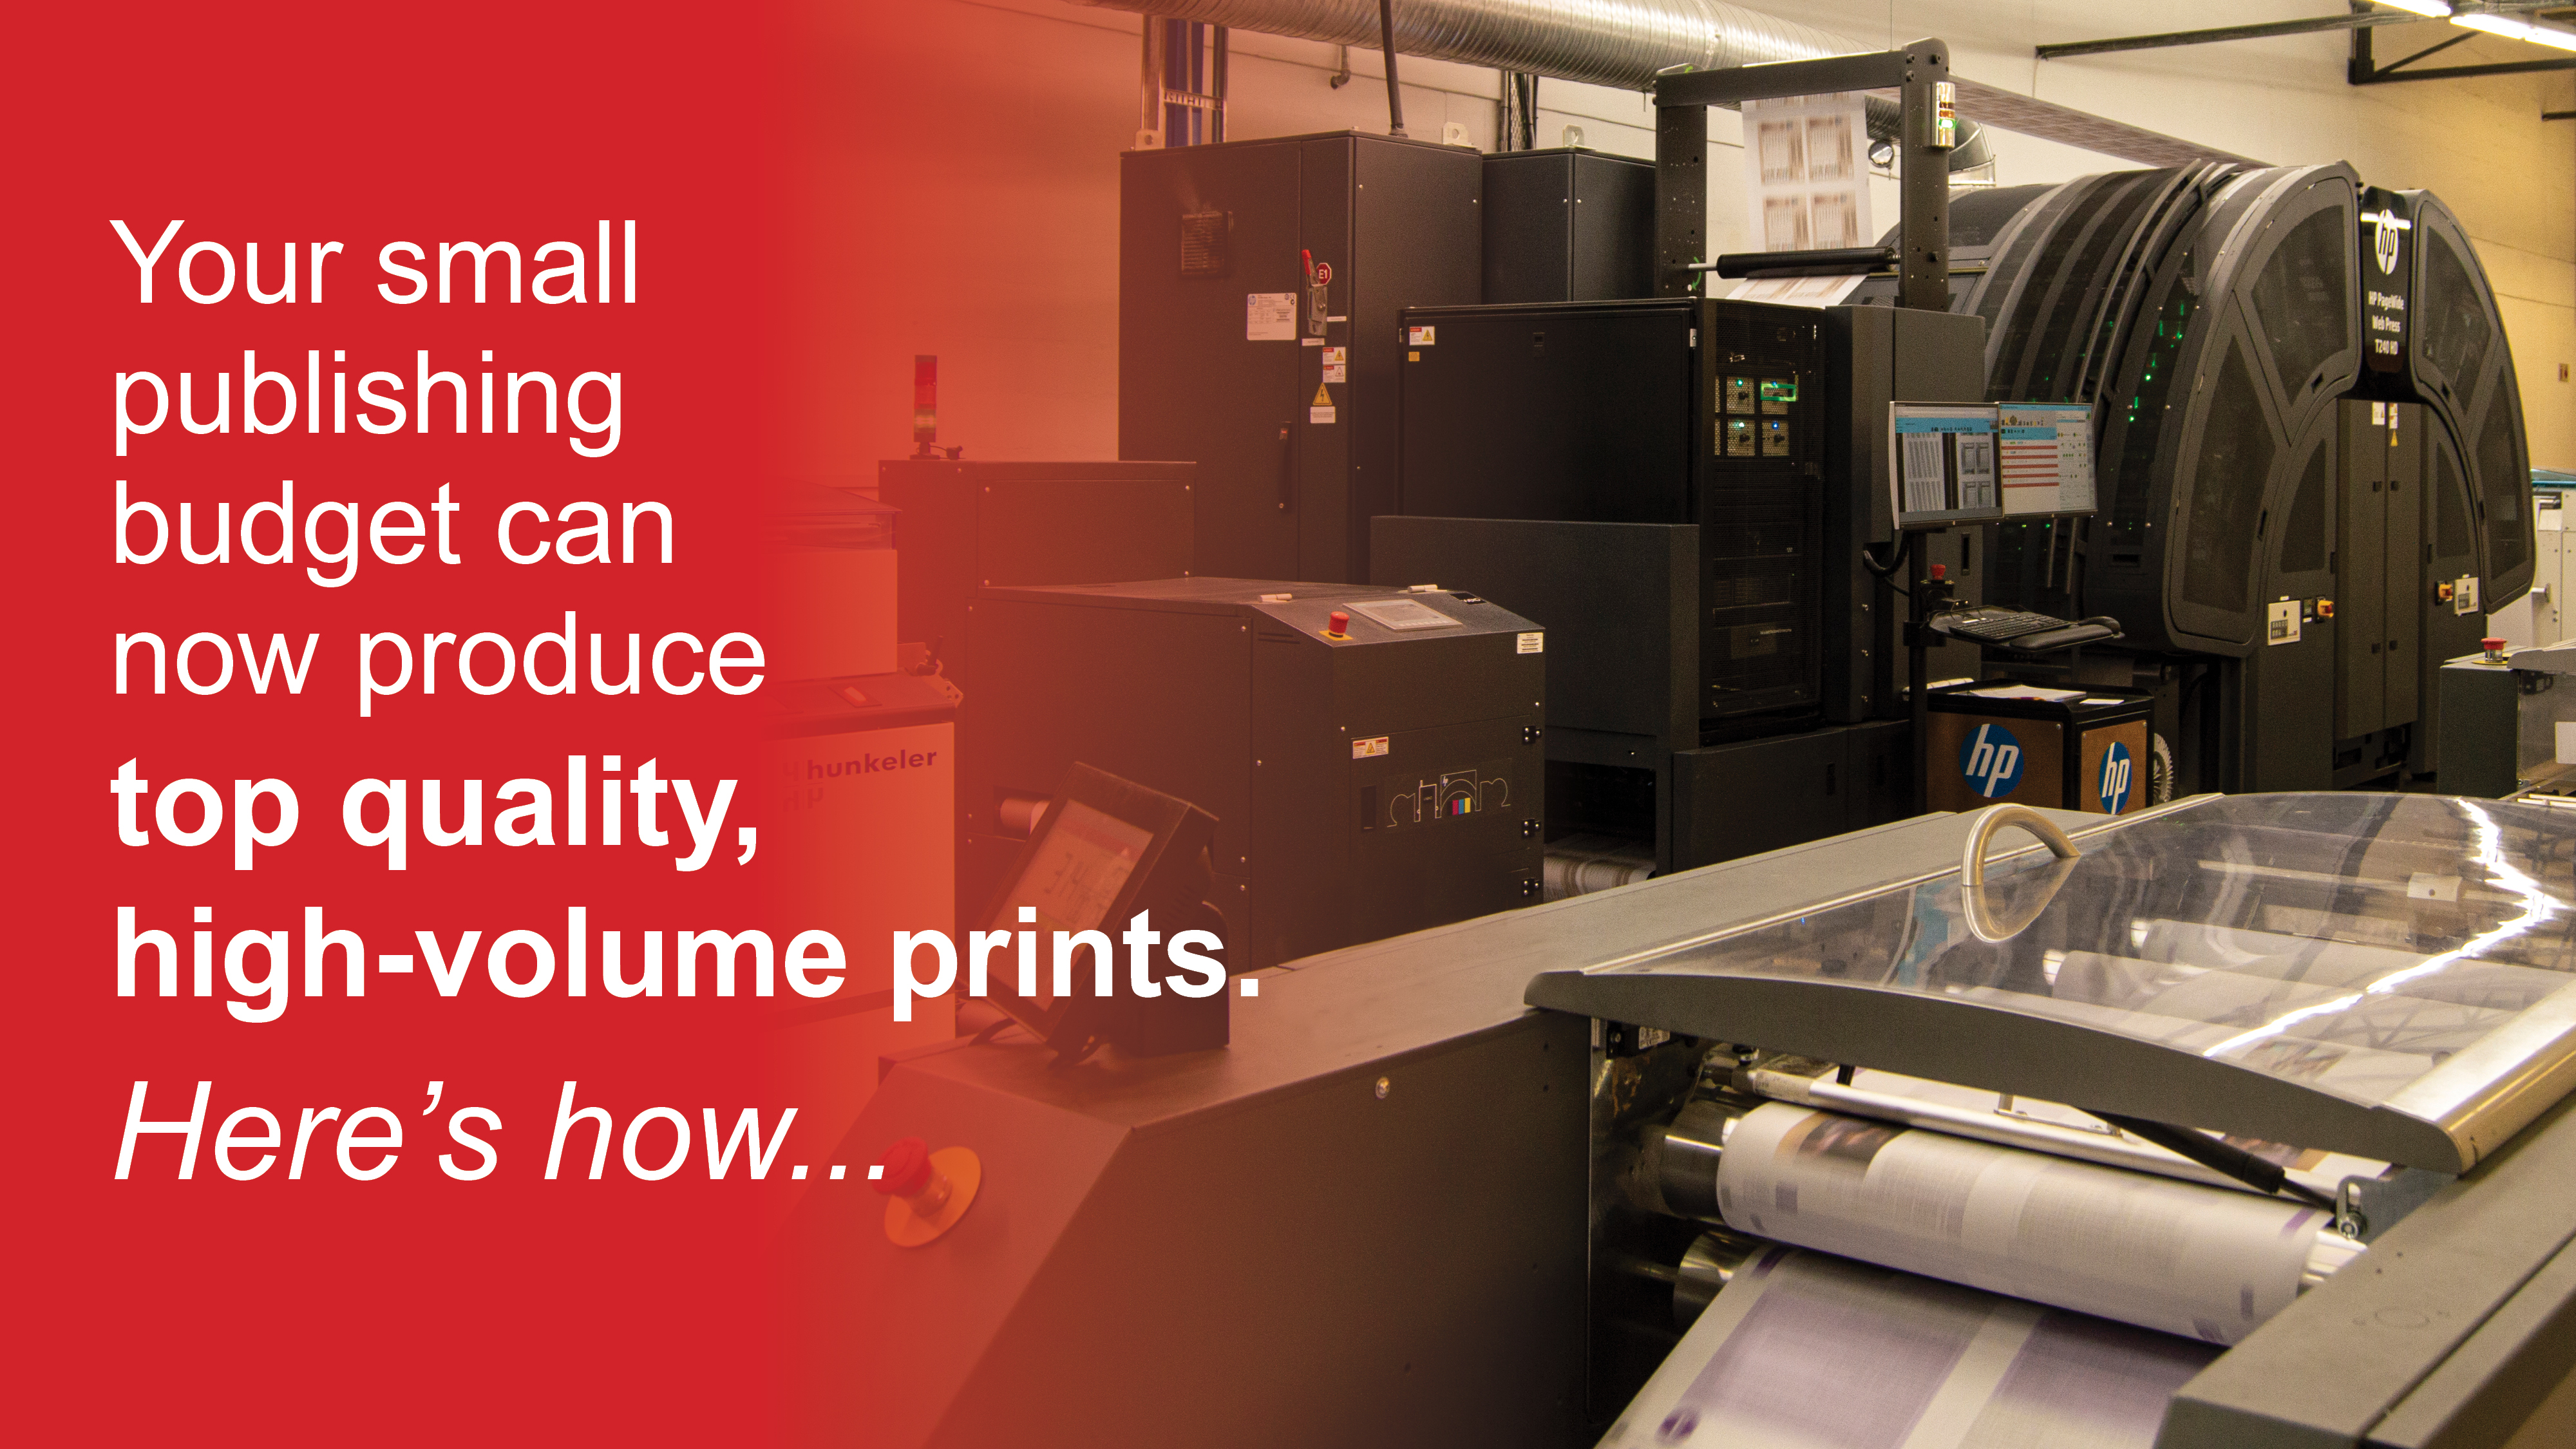 Your small publishing budget can now produce top quality, high-volume prints. Here's how…